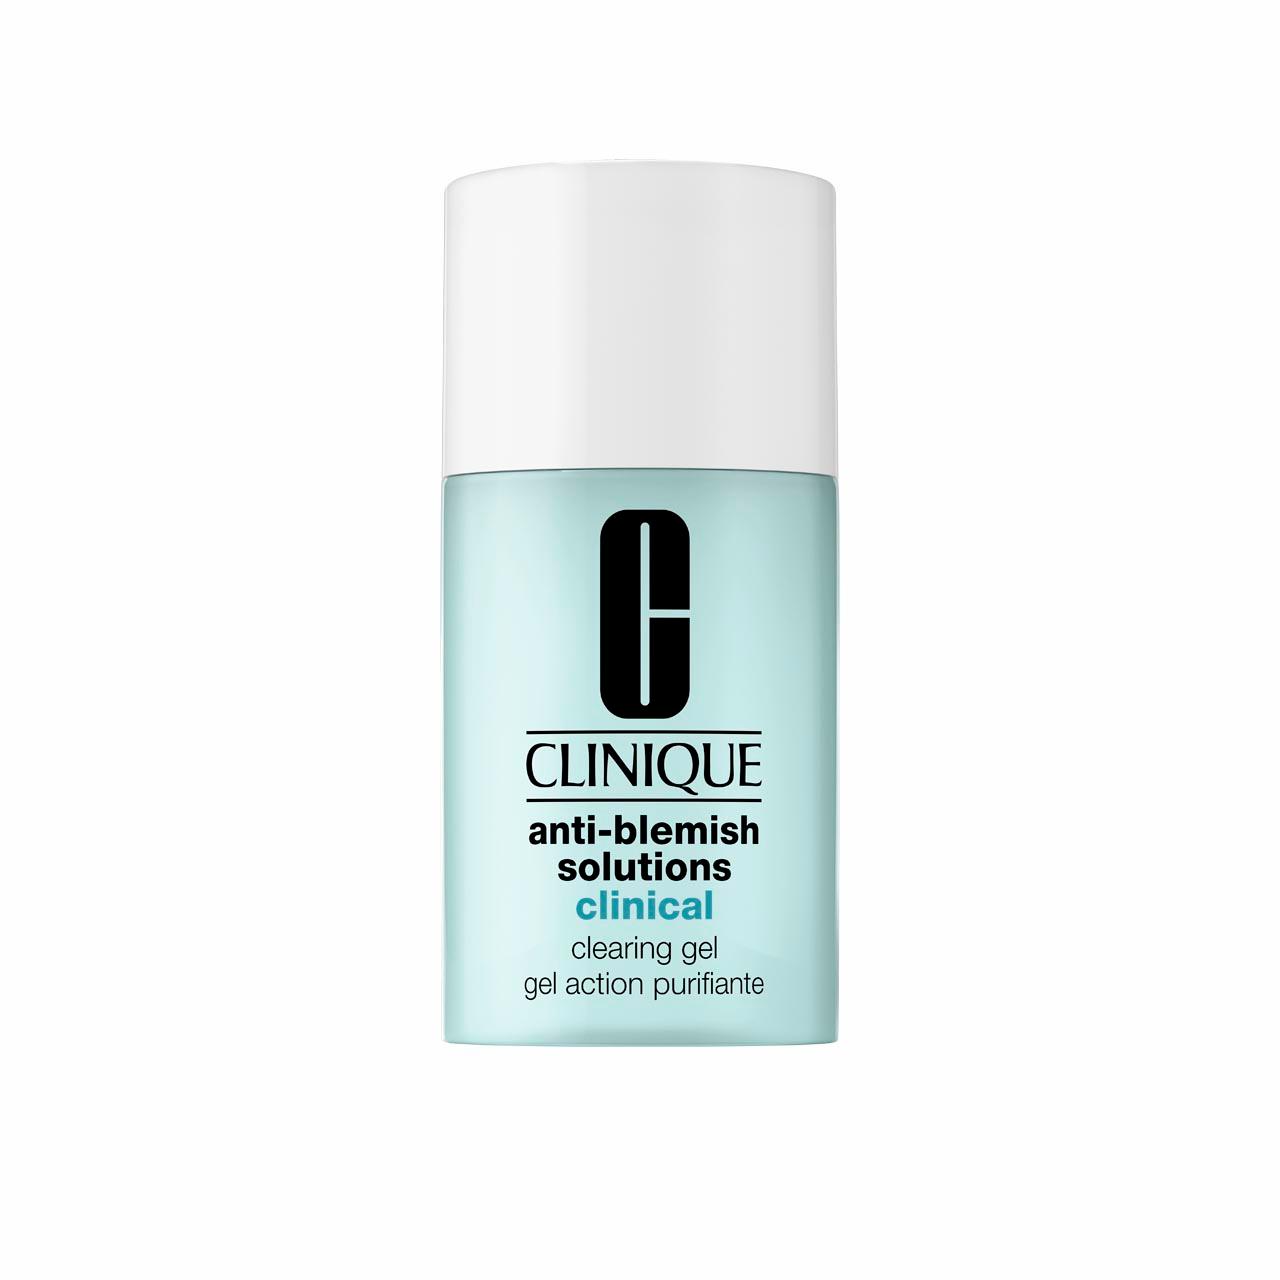 CLINIQUE Anti-Blemish Solutions Clinical Clearing Gel (30ml)